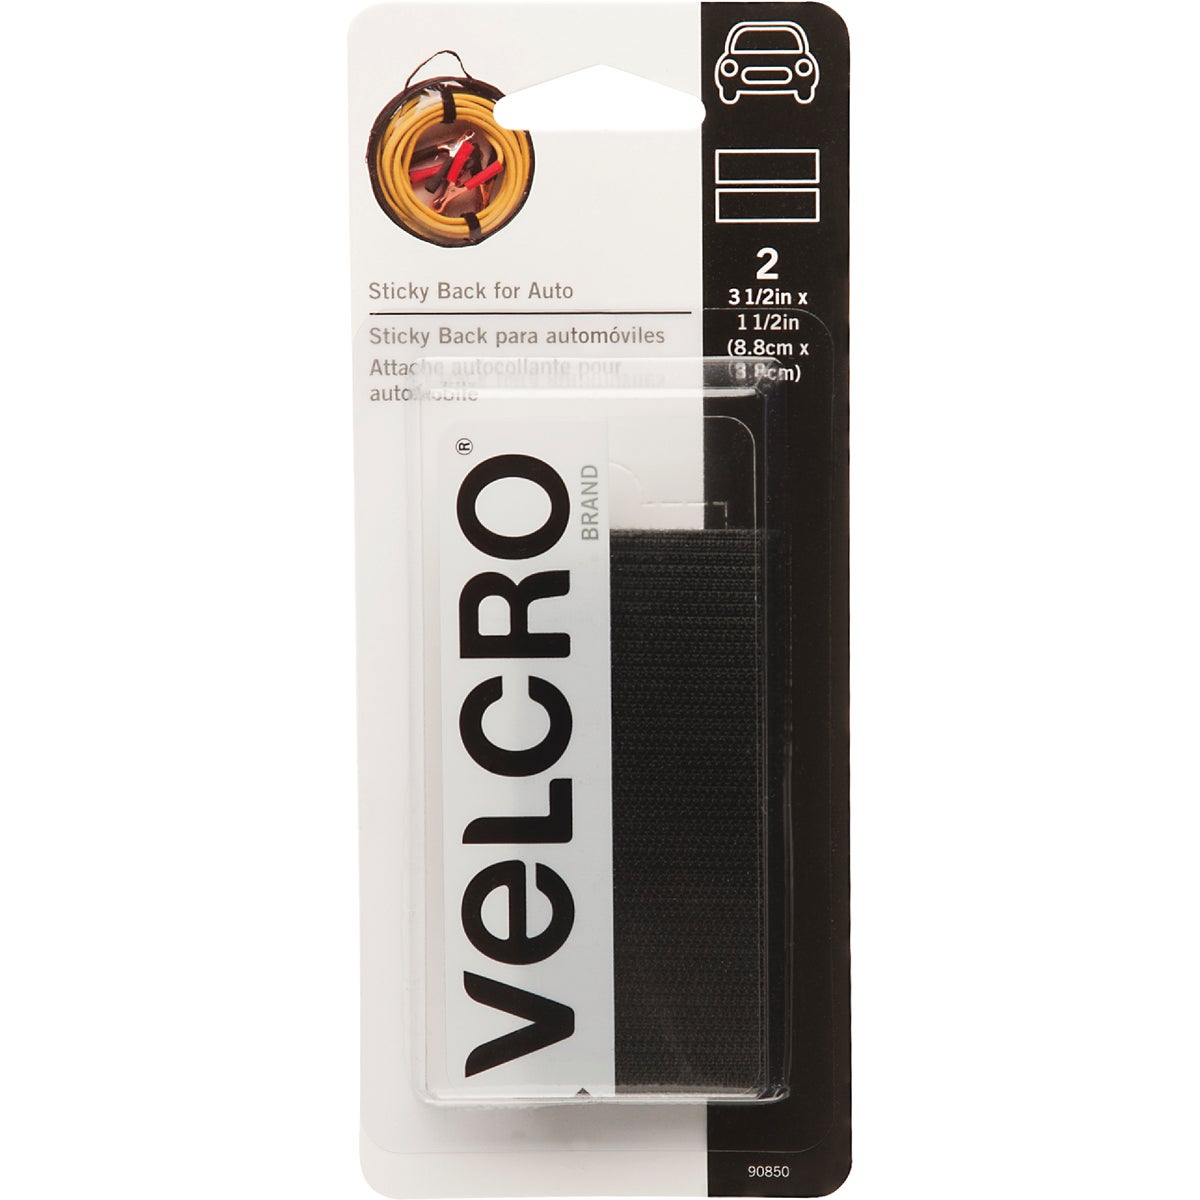 VELCRO Brand 1-1/2 In. x 3-1/2 In. Black Sticky Back For Auto Hook & Loop Strip (2 Ct.)